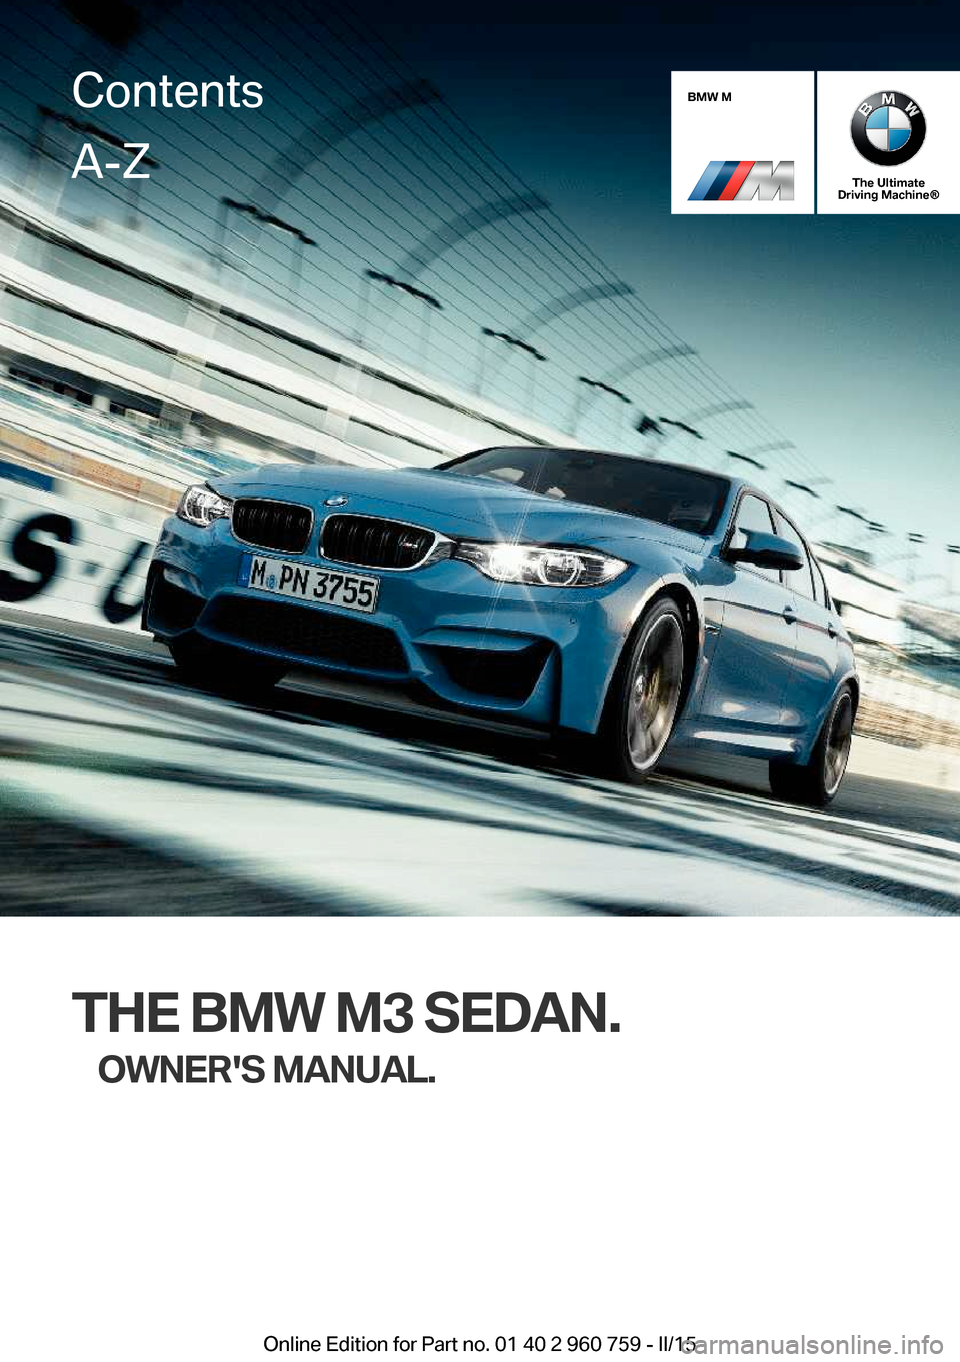 BMW M3 2016 F80 Owners Manual BMW M
The Ultimate
Driving Machine®
THE BMW M3 SEDAN.
OWNERS MANUAL.
ContentsA-Z
Online Edition for Part no. 01 40 2 960 759 - II/15   